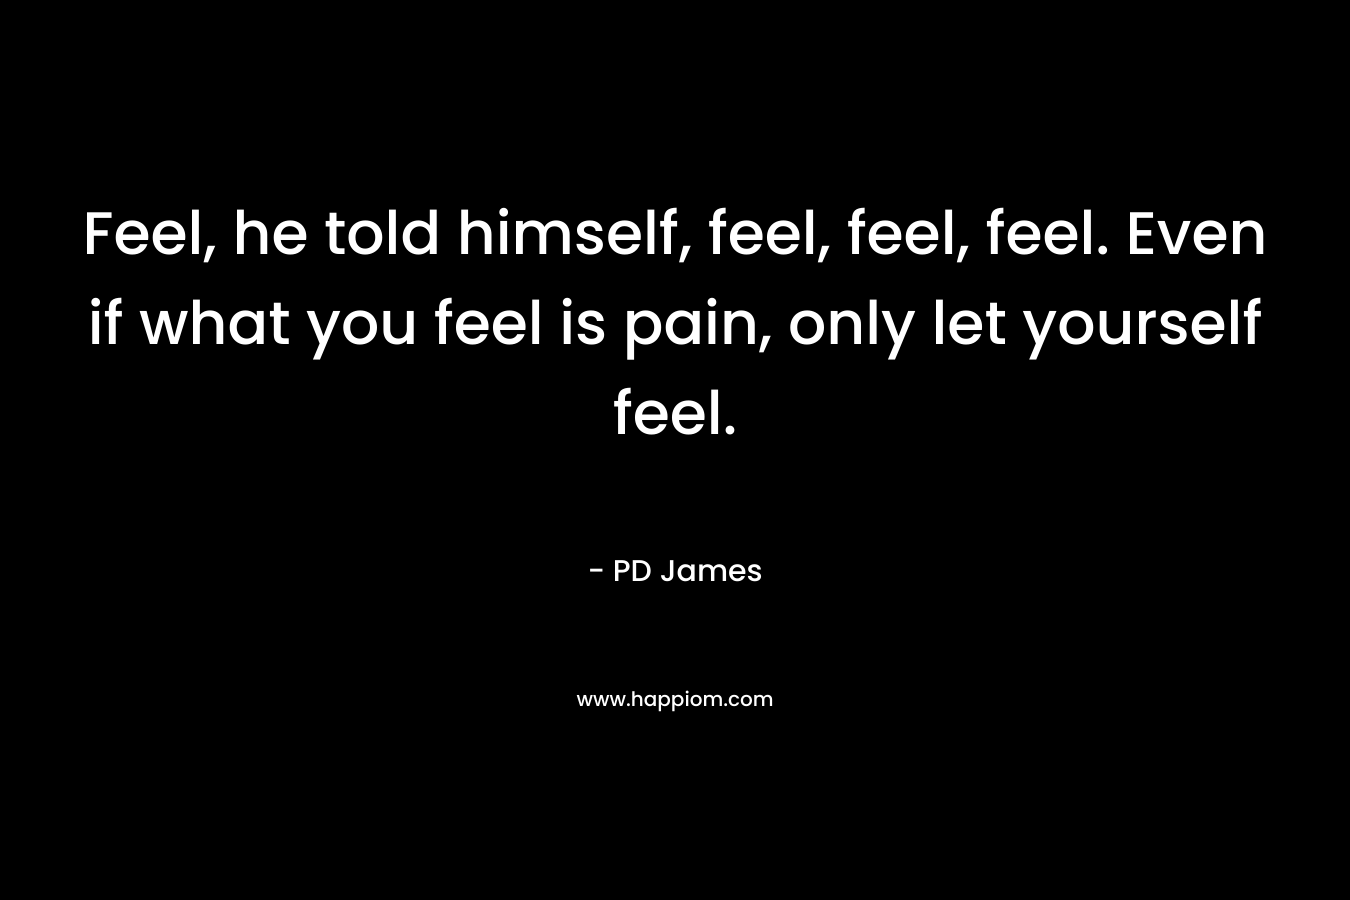 Feel, he told himself, feel, feel, feel. Even if what you feel is pain, only let yourself feel.